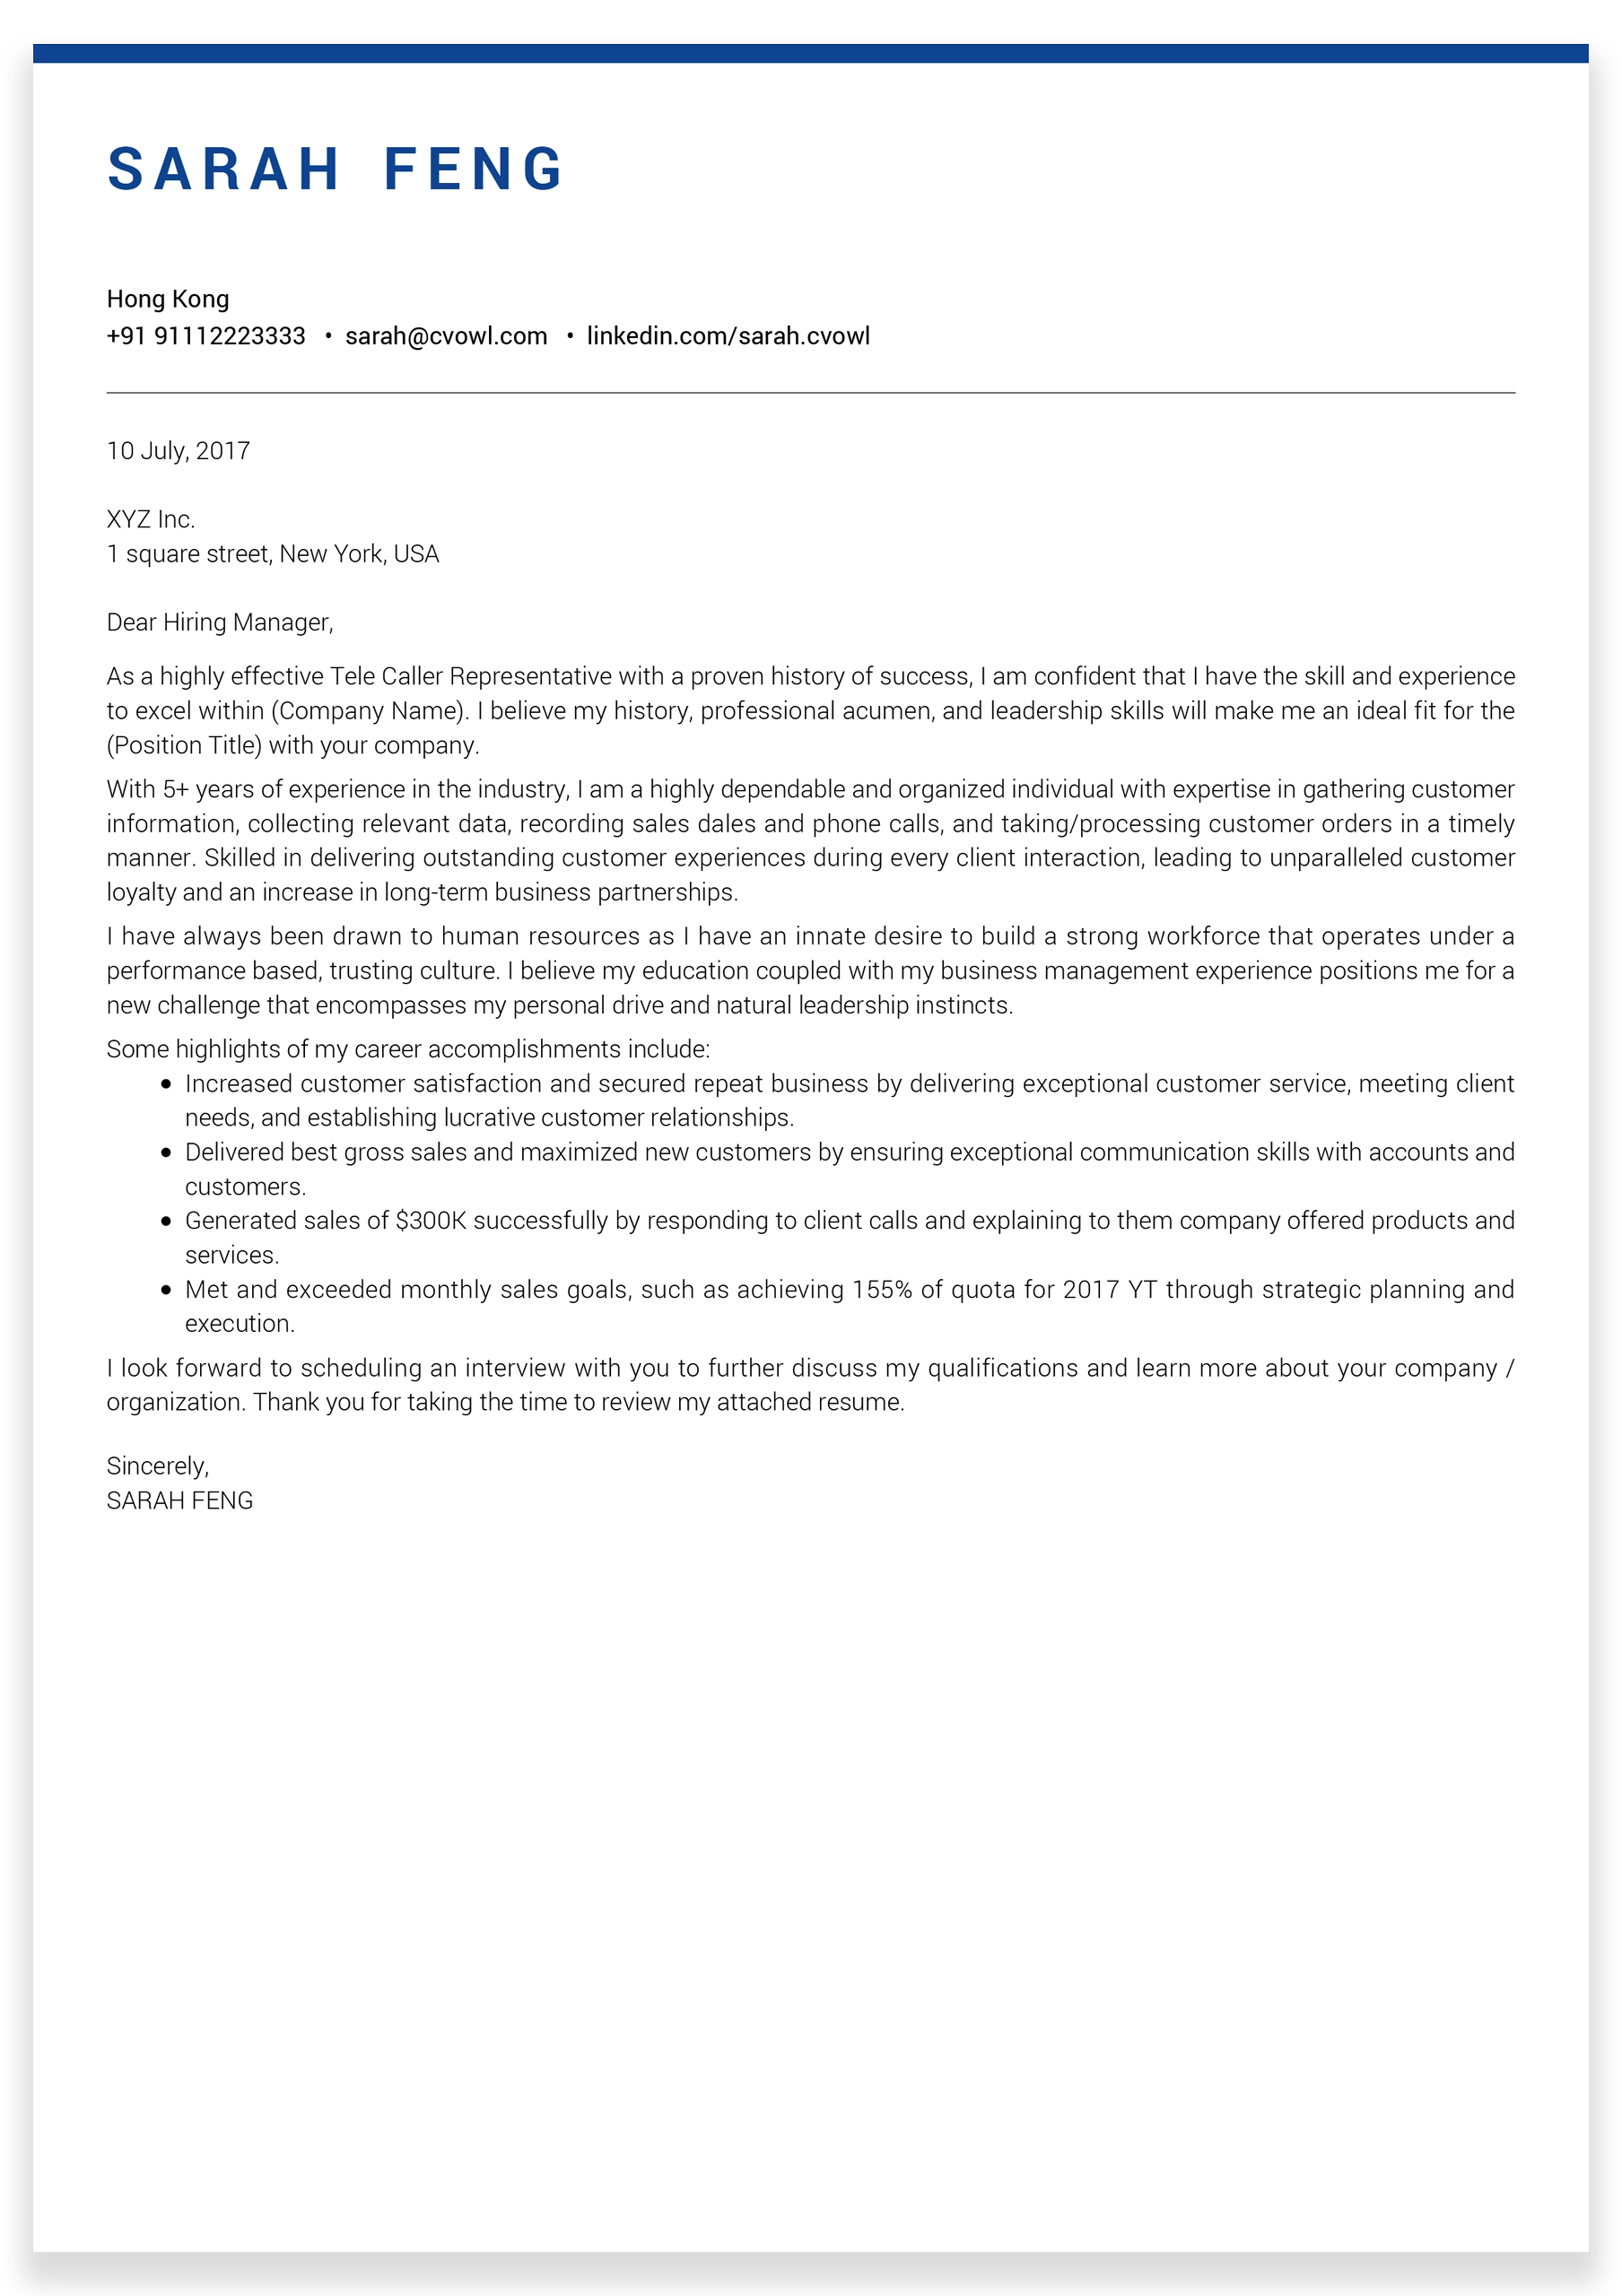 Technical-Consultant-Cover-Letter-sample13